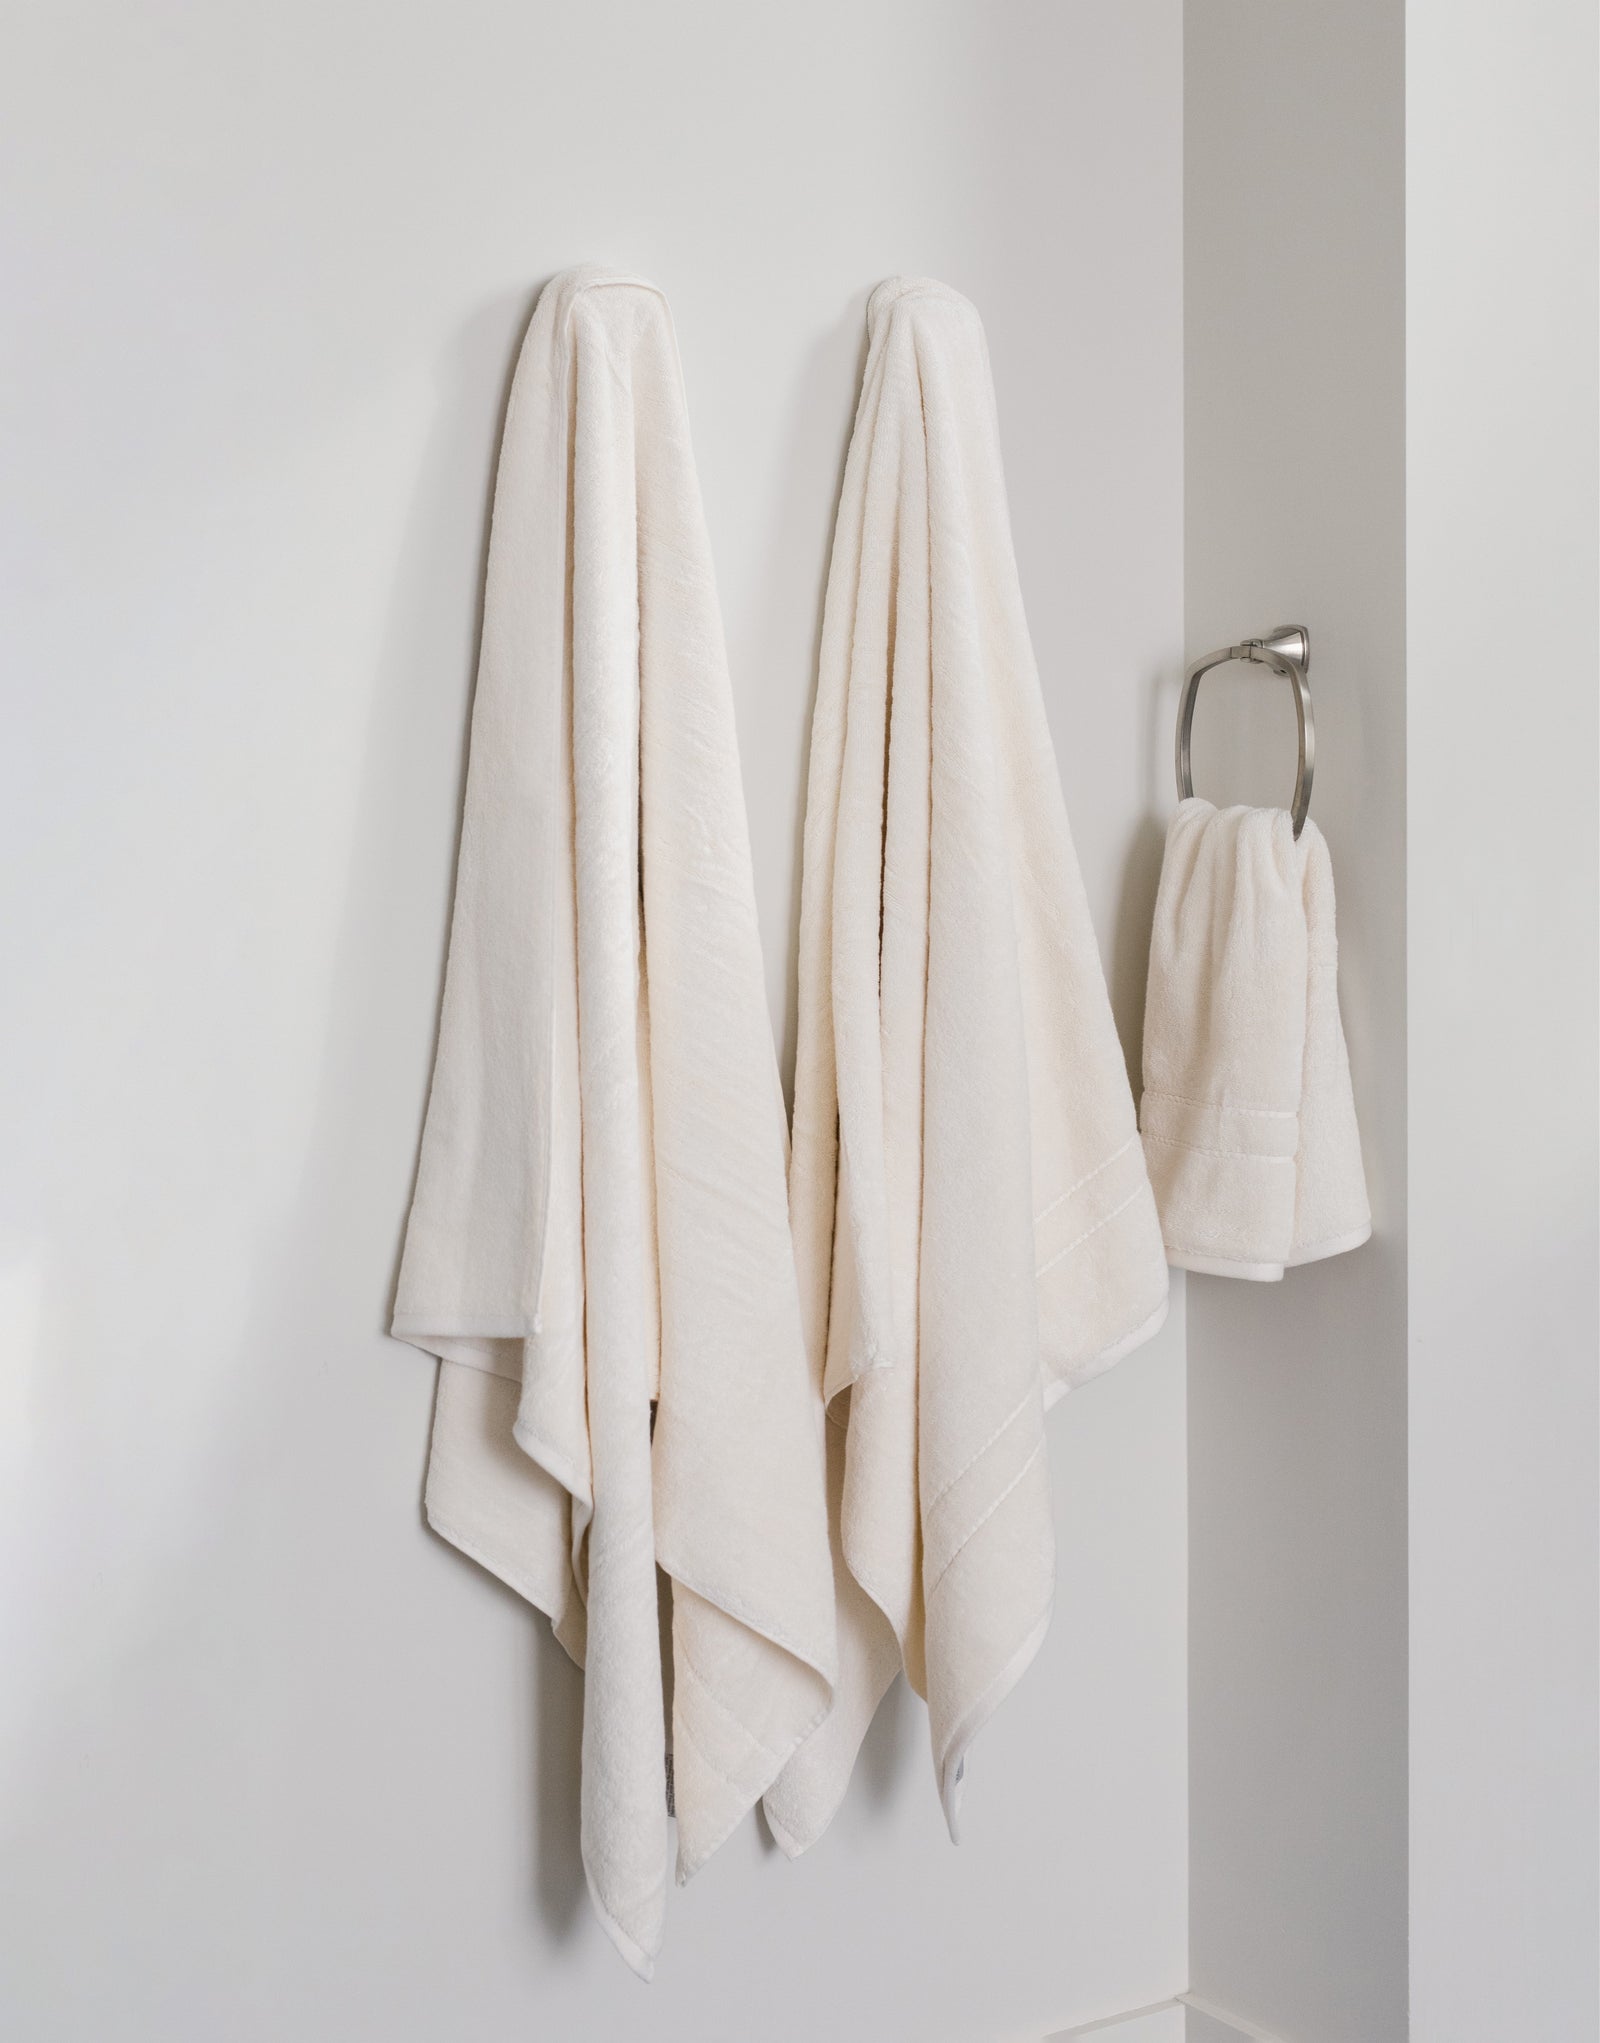 Premium Plush Bath Towels in the color Creme. Photo of Premium Plush Bath Towels taken in a bathroom showing the towels which are hung from a towel rack. 